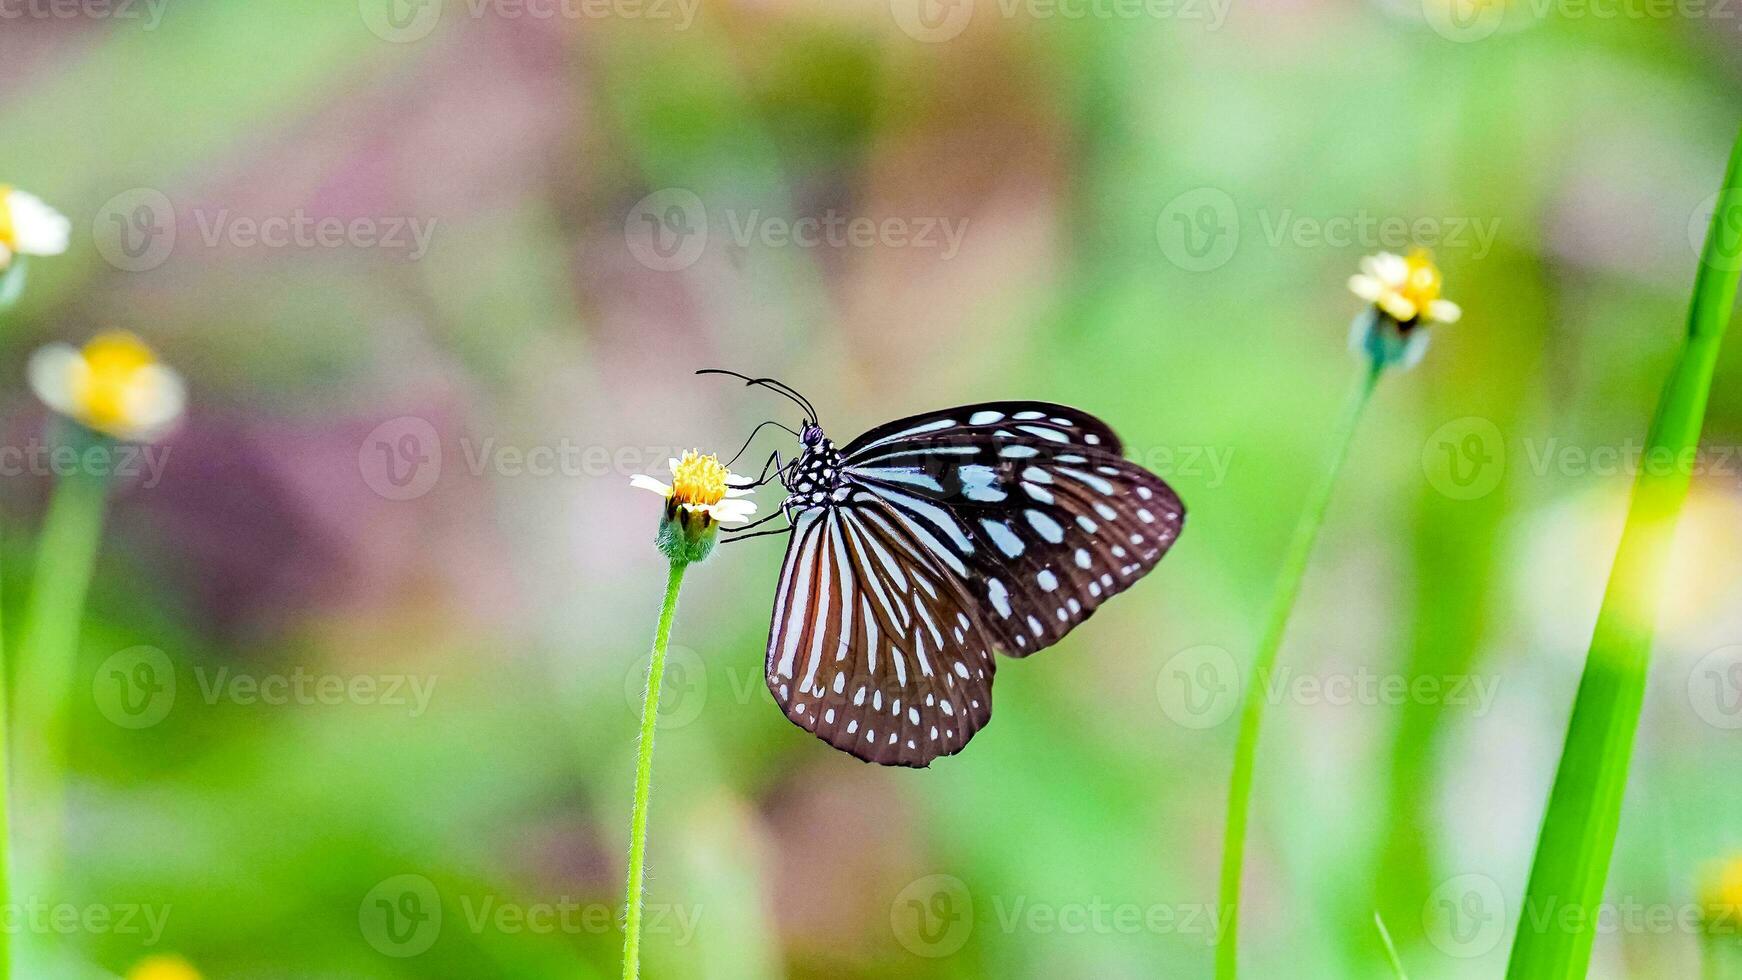 Glassy Tiger Butterfly collecting nectar from a flower. photo